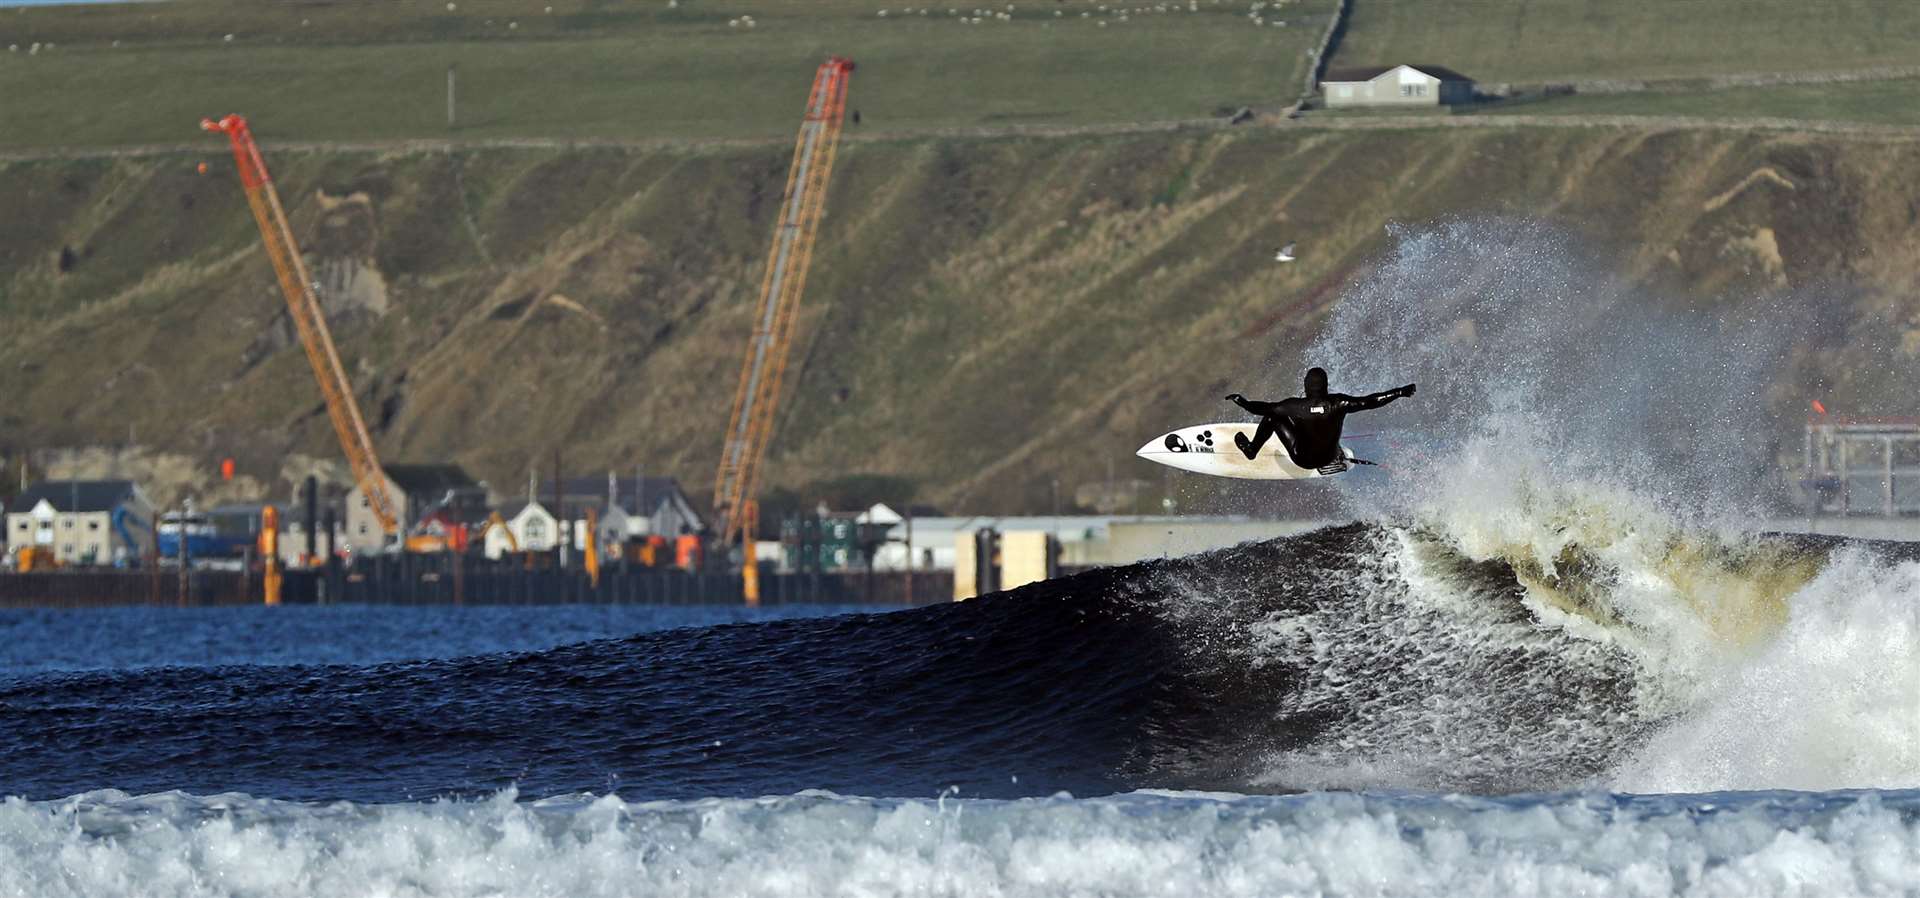 A surfer takes to the air at Thurso East, with cranes working on the new pier at Scrabster in the background. Picture: James Gunn